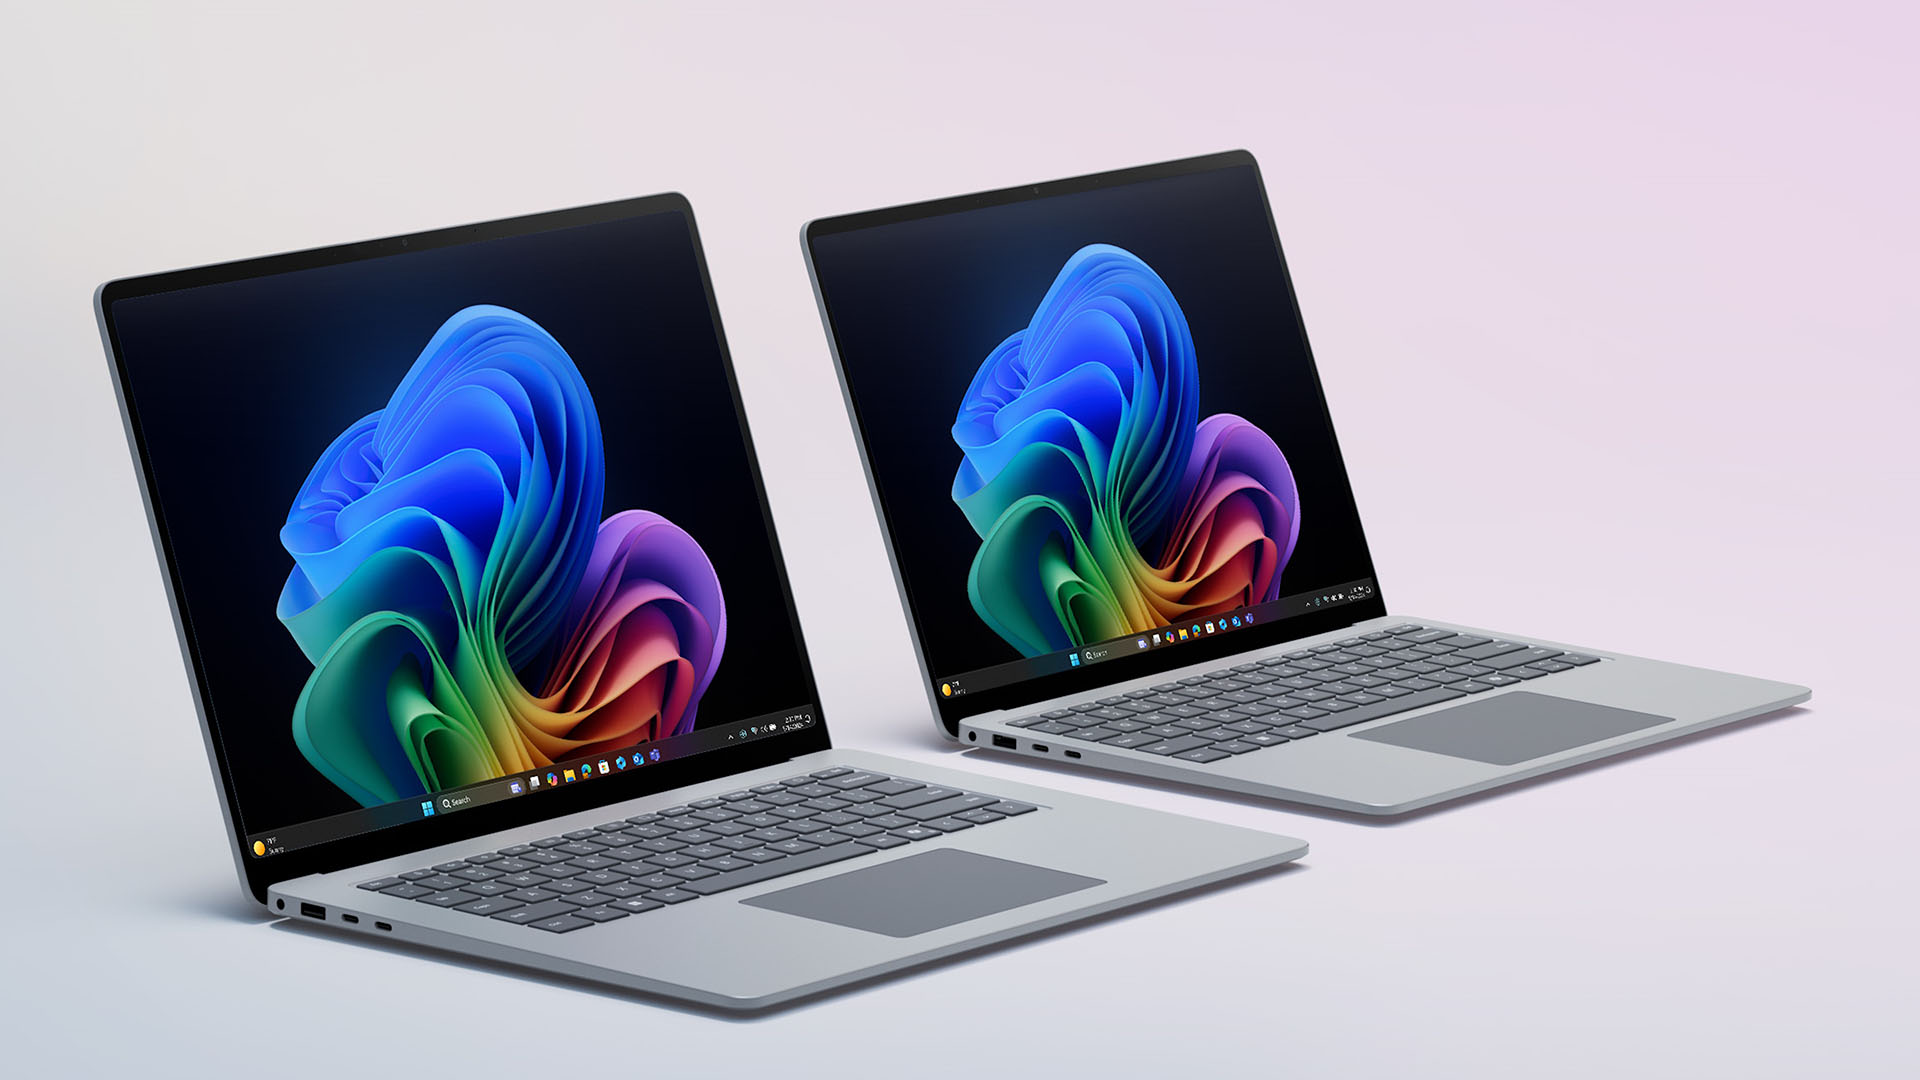 Two Surface Laptop devices side by side